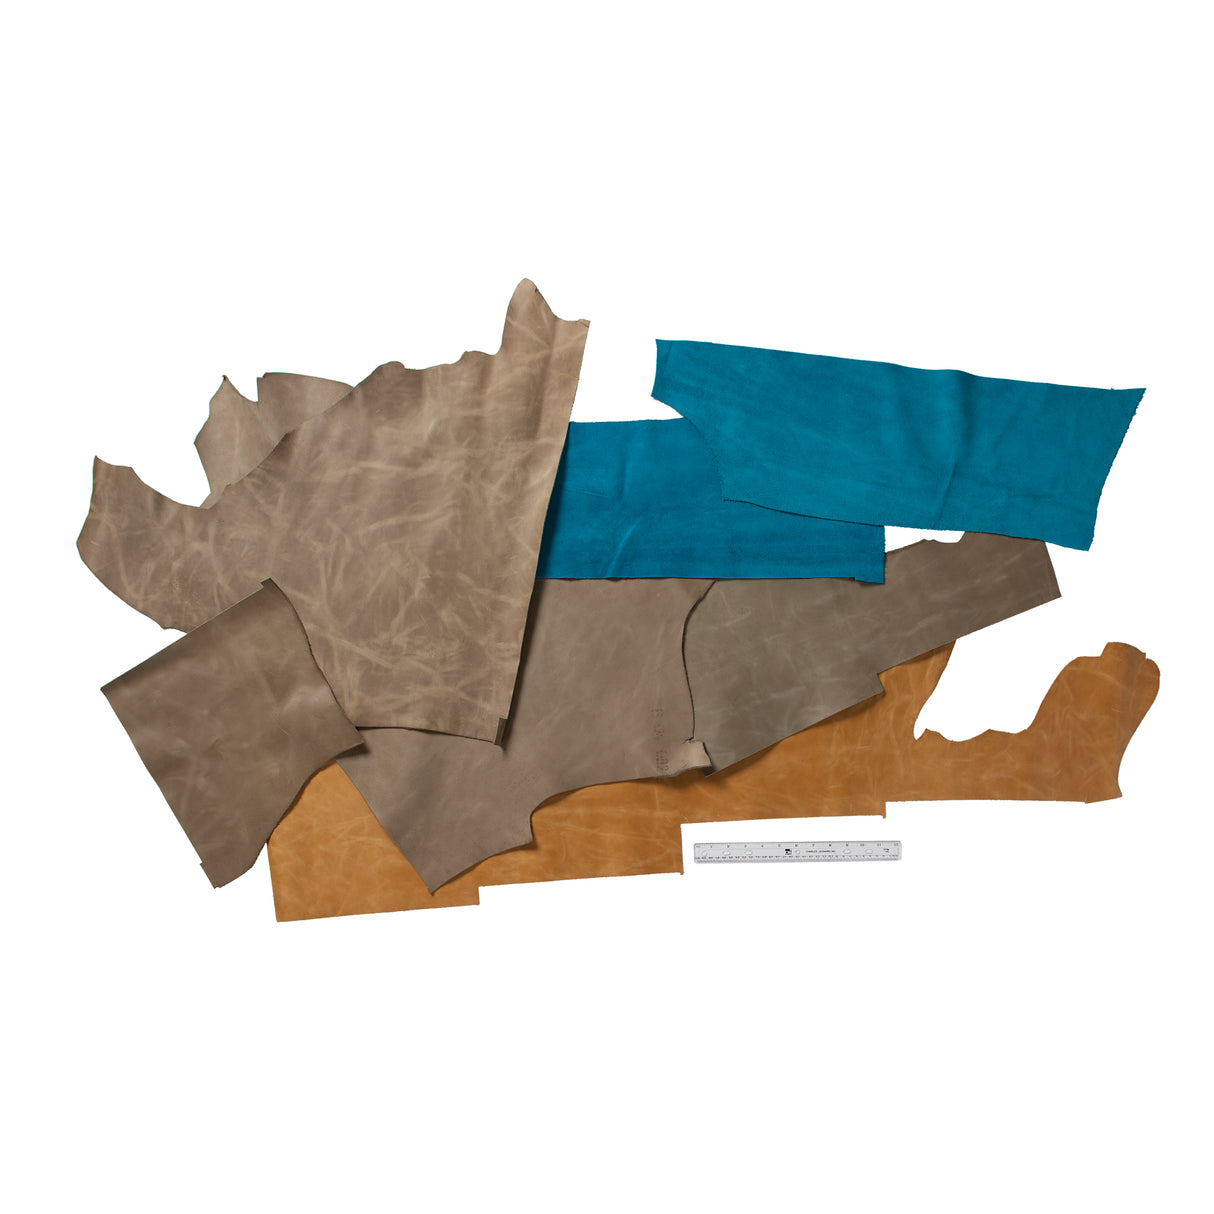 Chrome Tanned Leather Remnants, Assorted Colors, 3 lb. Bag